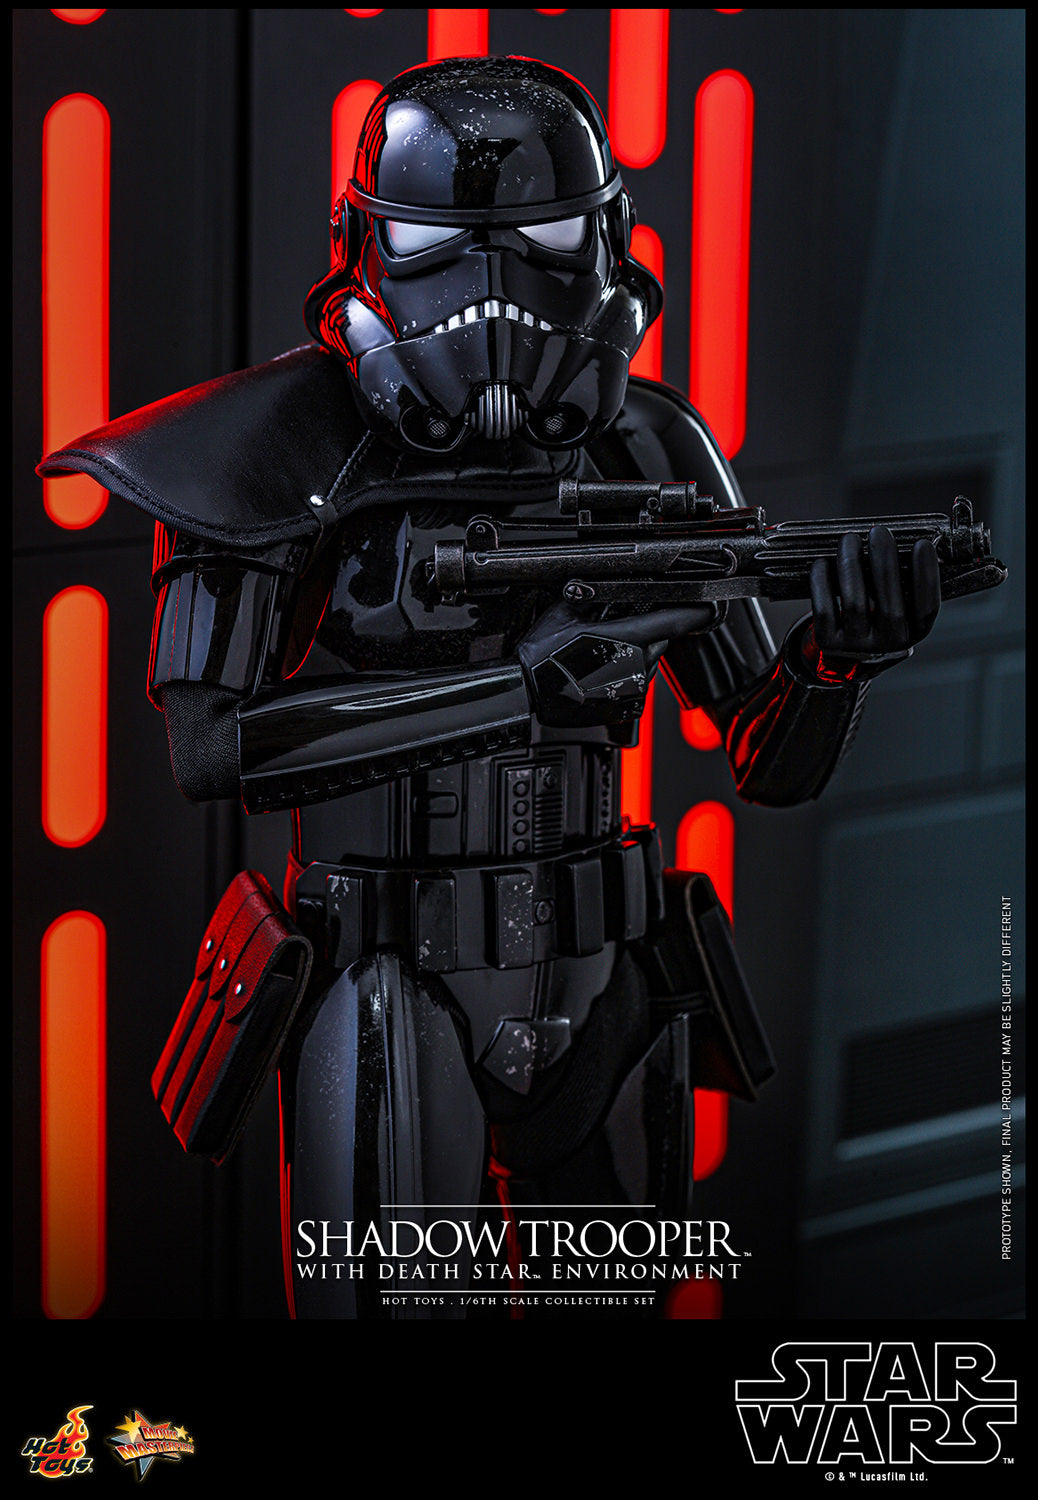 PRE-ORDER Shadow Trooper™ with Death Star Environment Sixth Scale Figure